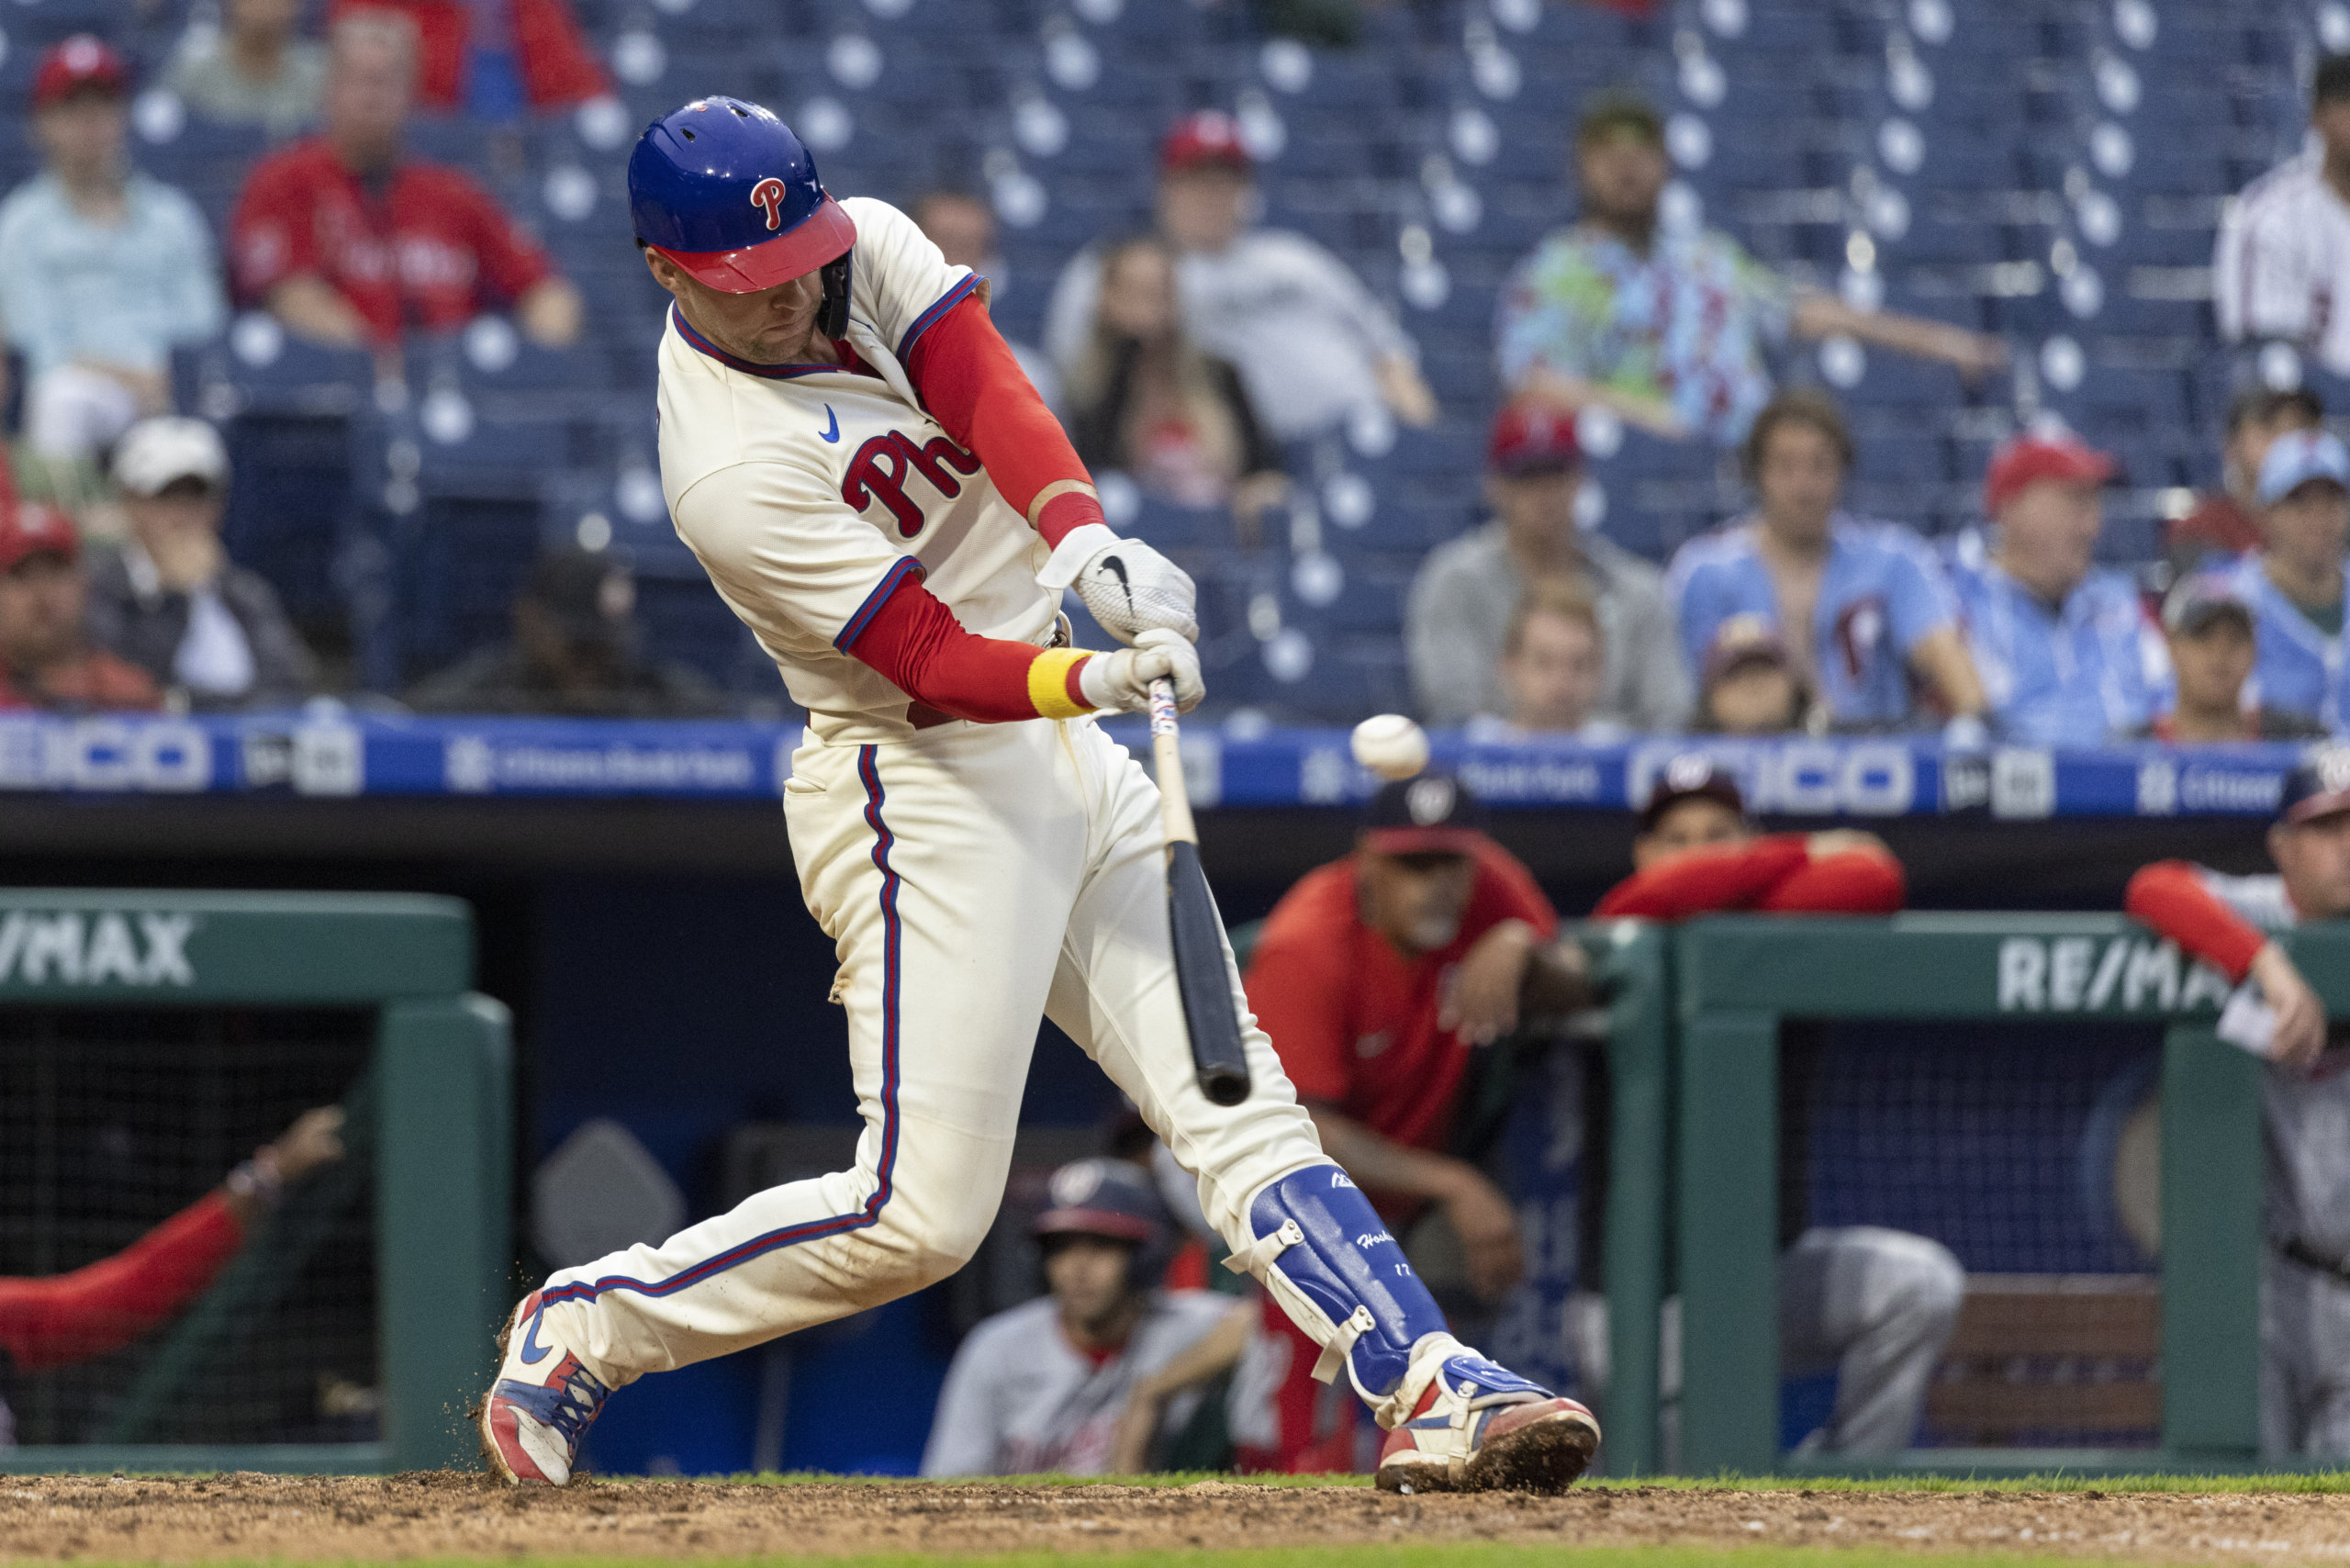 Rhys Hoskins drives in 4 after lengthy delay to sweep Nationals